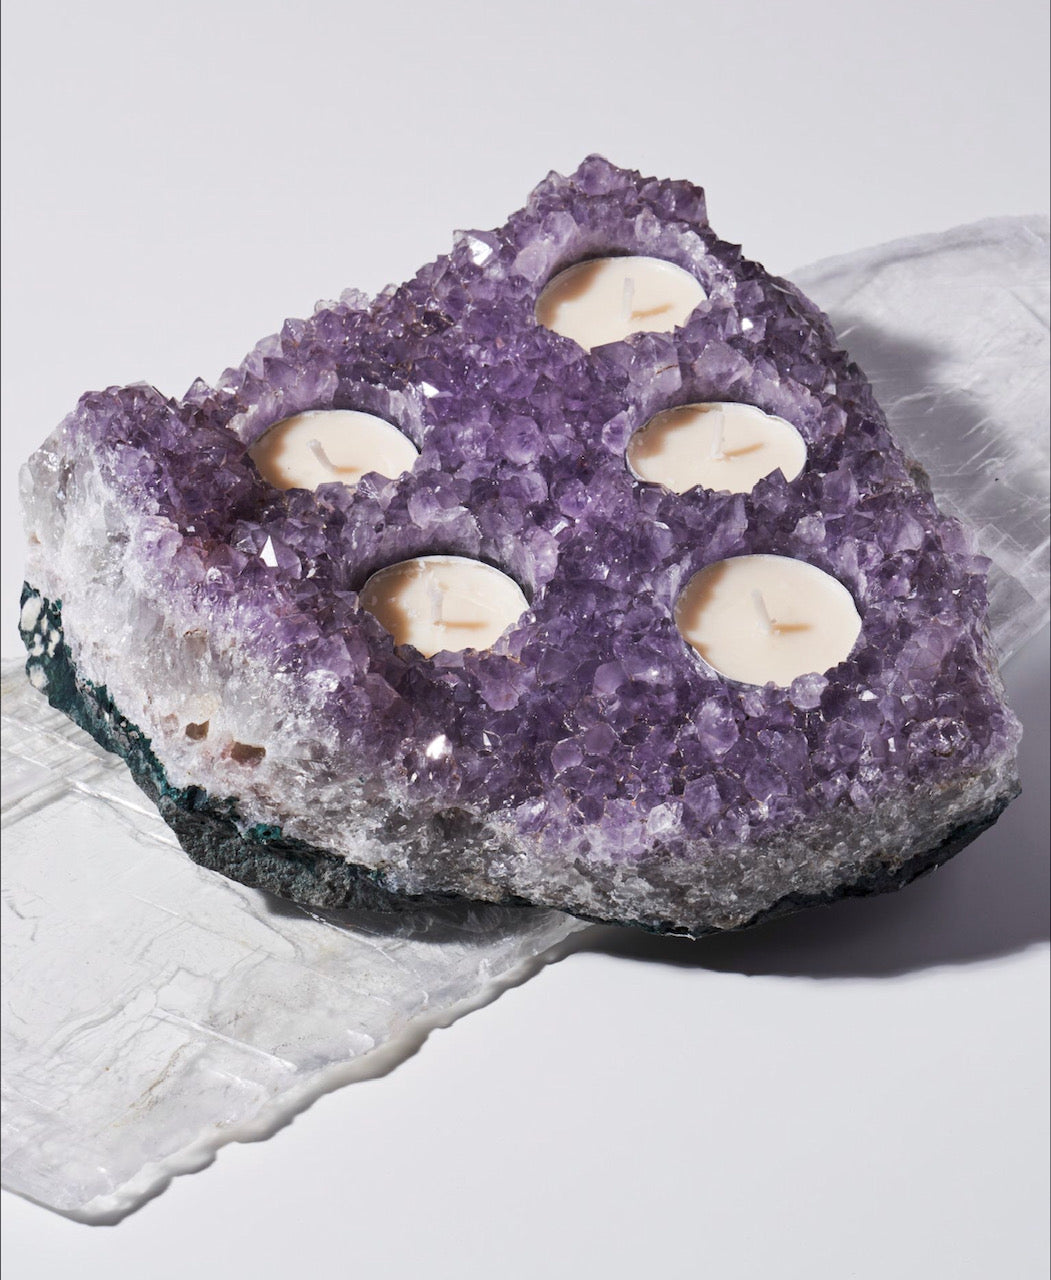 Experience Good Vibes with the Amethyst Candle Holder | Stunning 5-Votive Holder for Tranquil Energy